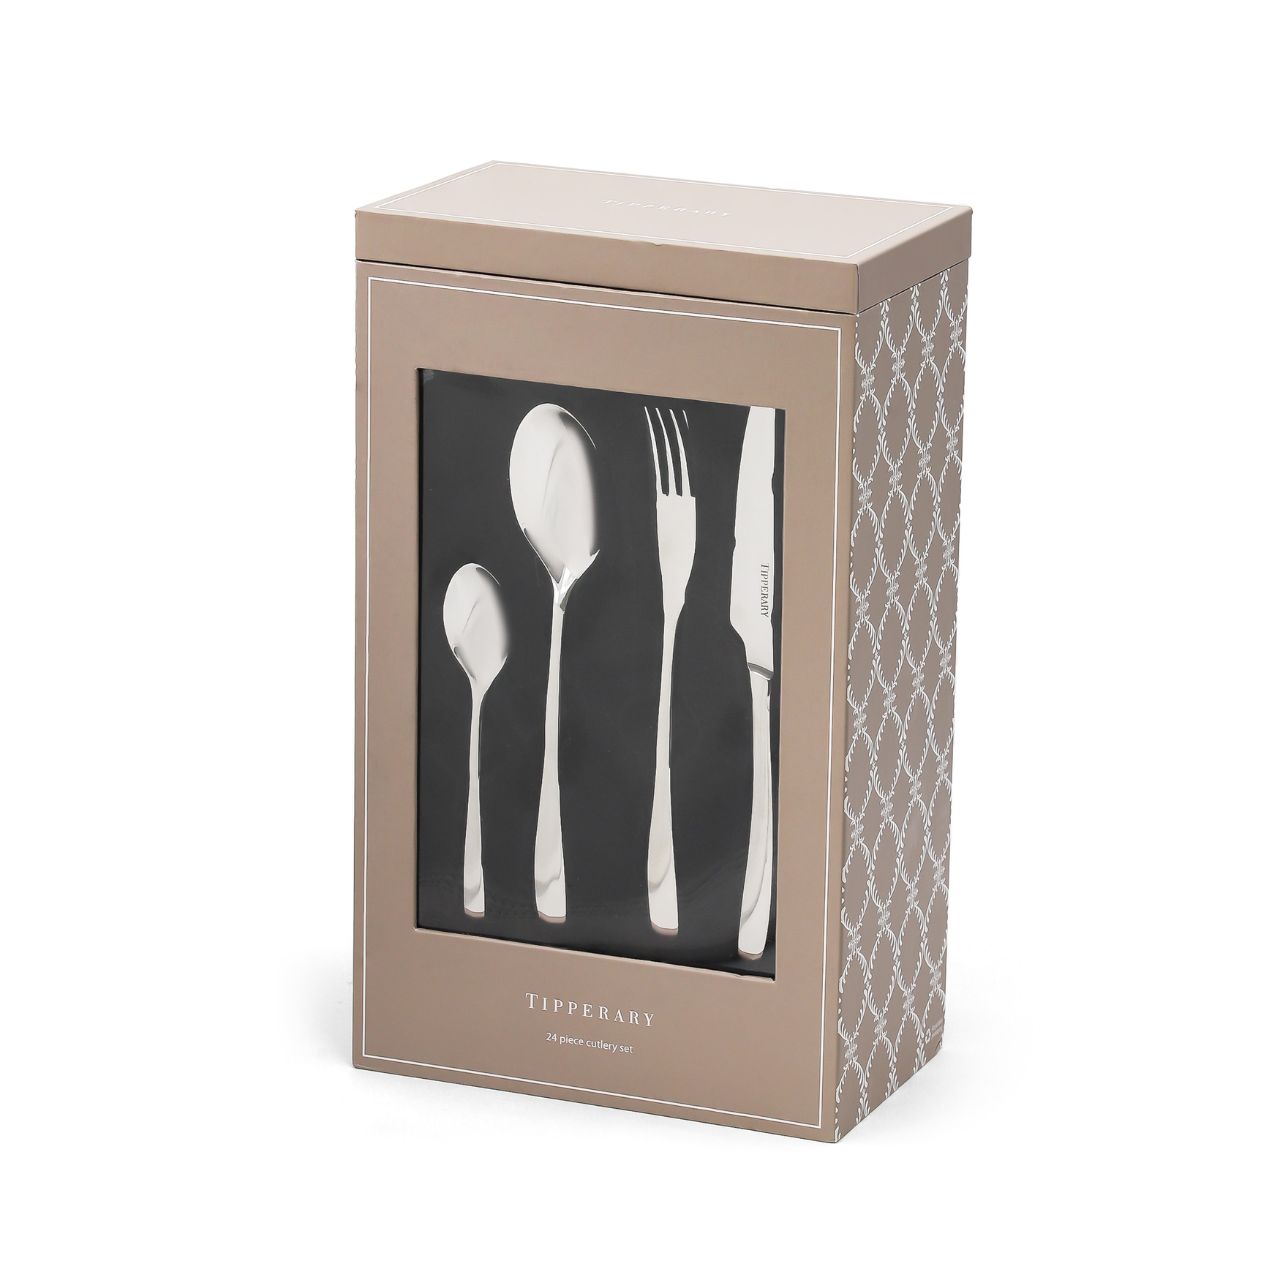 Milano 24 Piece Boxed Cutlery Set- NEW AUTUMN by Tipperary  Refine your dinnerware with the Tipperary Milano 24 Piece Boxed Cutlery Set. Constructed from high quality stainless steel with a sleek matte black finish, this 24 piece set provides a modern elegance to your dining experience. Durable and dishwasher-safe, this set is perfect for everyday use.